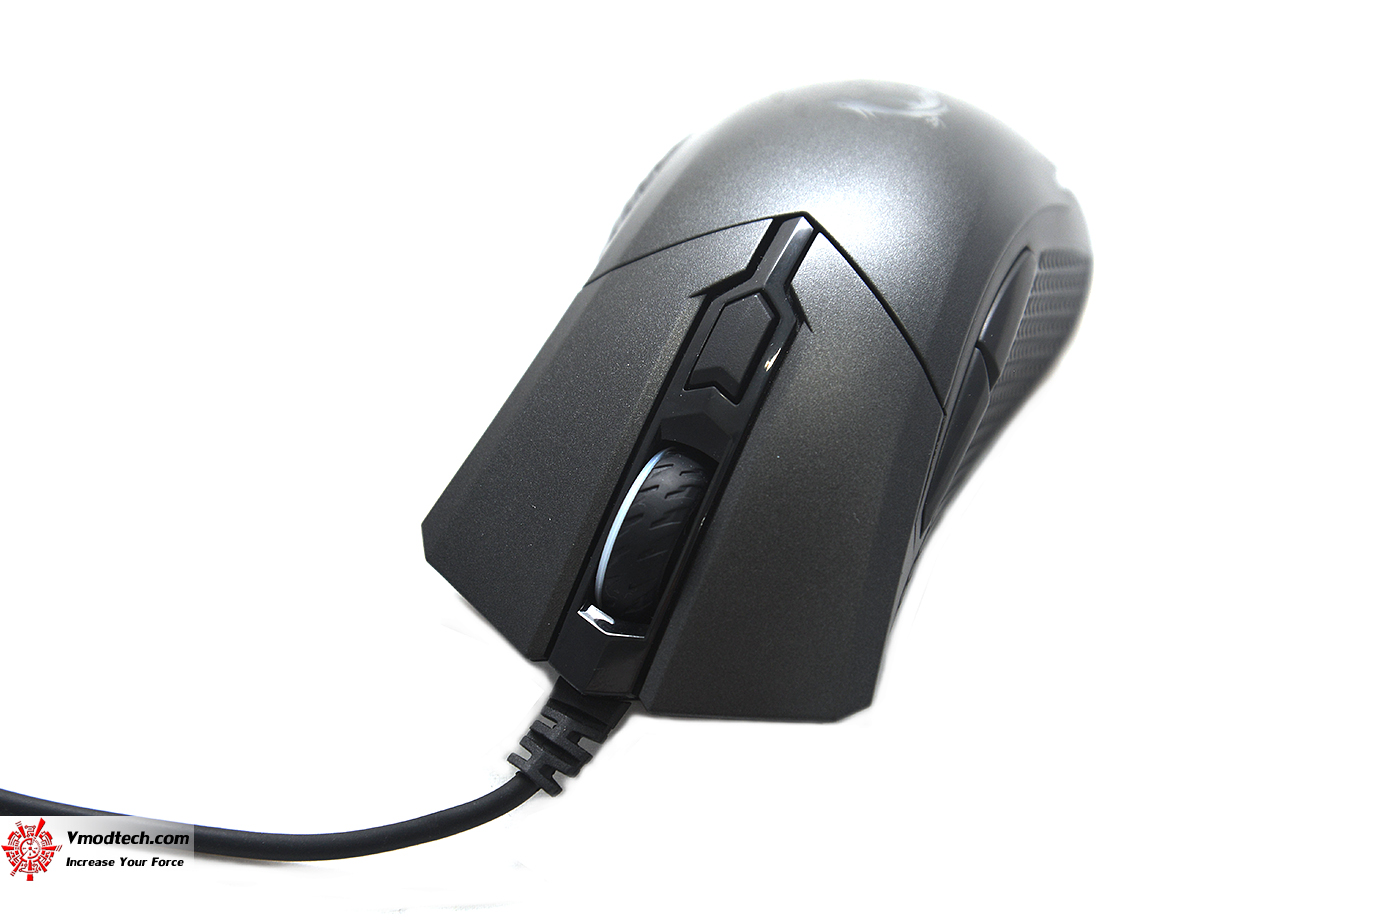 dsc 4927 MSI CLUTCH GM50 GAMING MOUSE REVIEW